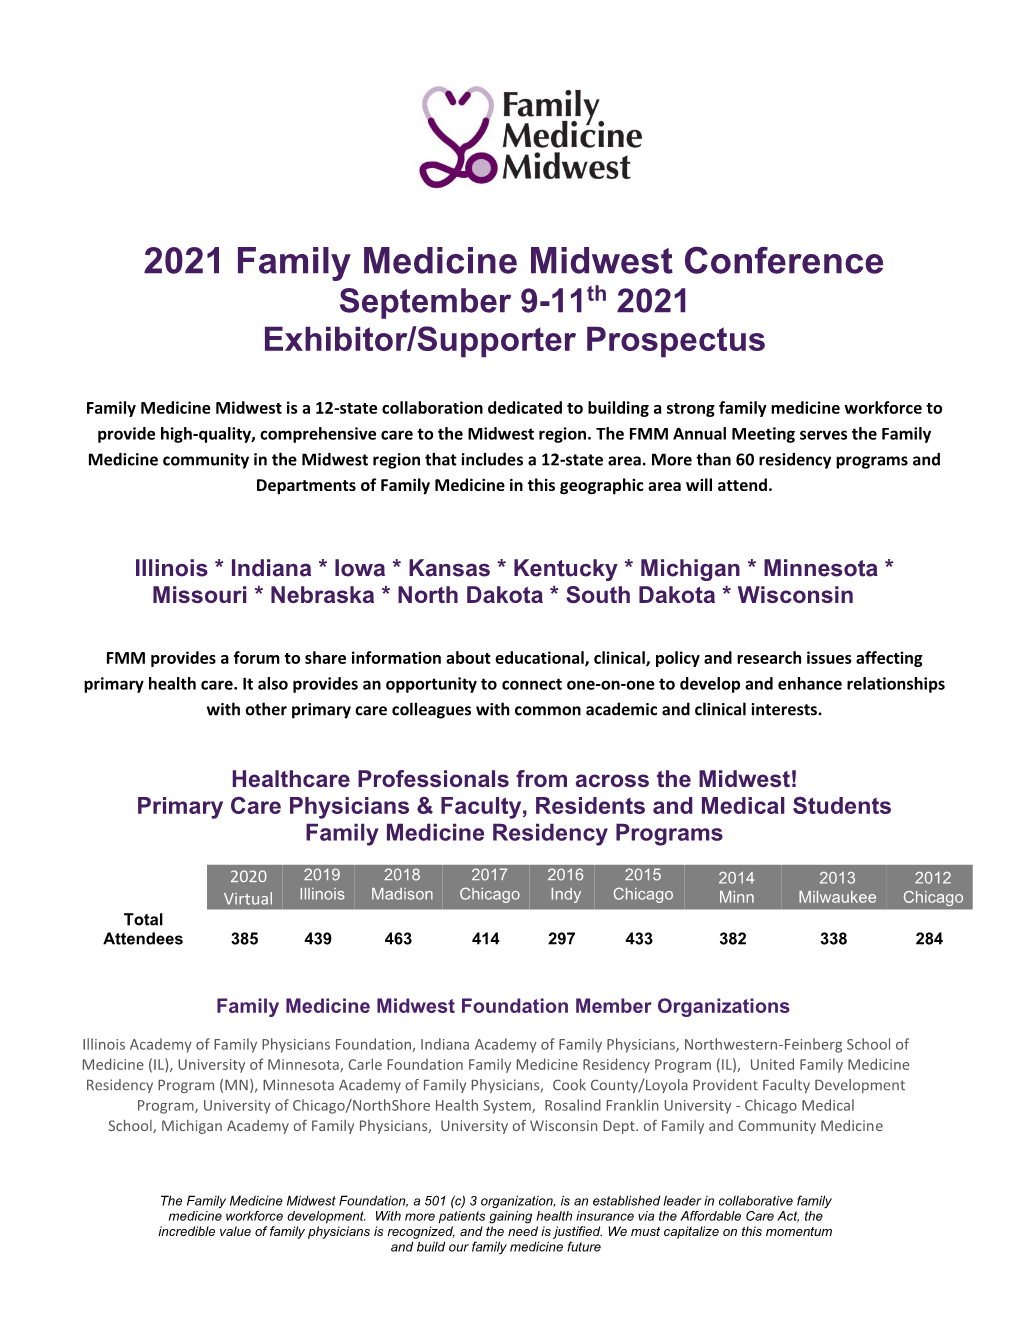 2021 Family Medicine Midwest Conference September 9-11Th 2021 Exhibitor/Supporter Prospectus